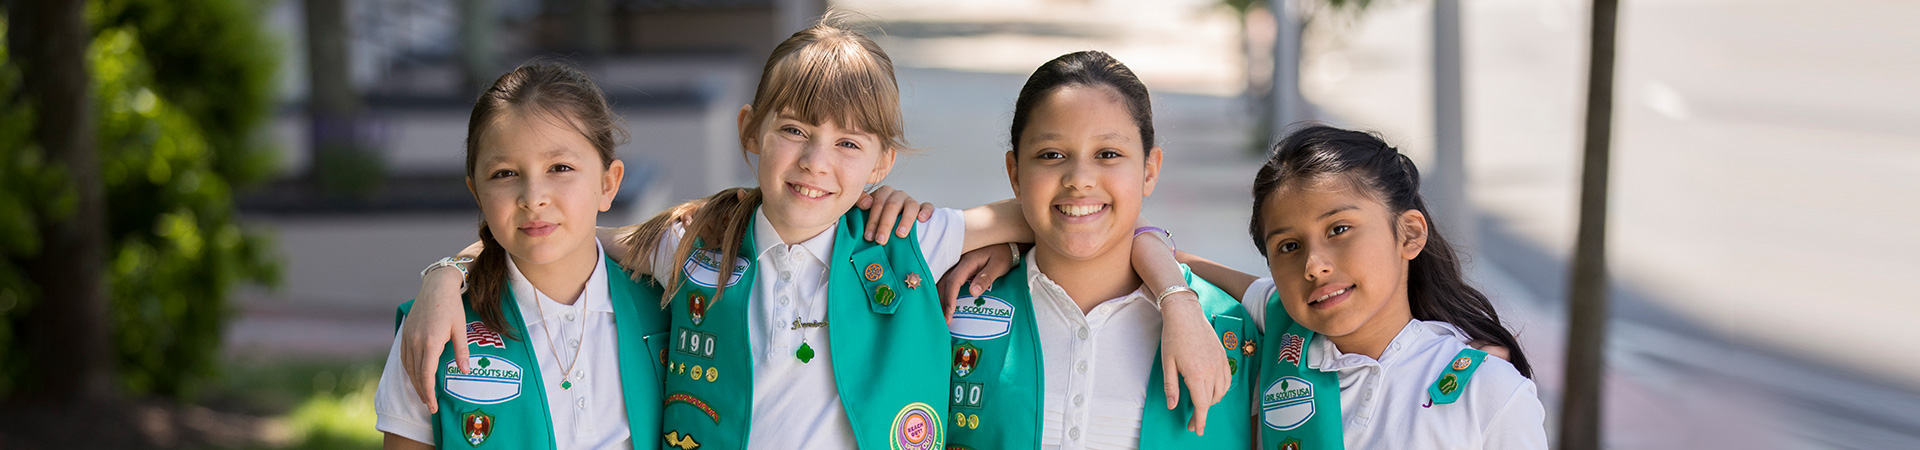  group of girl scouts walking outside smiling at camera 